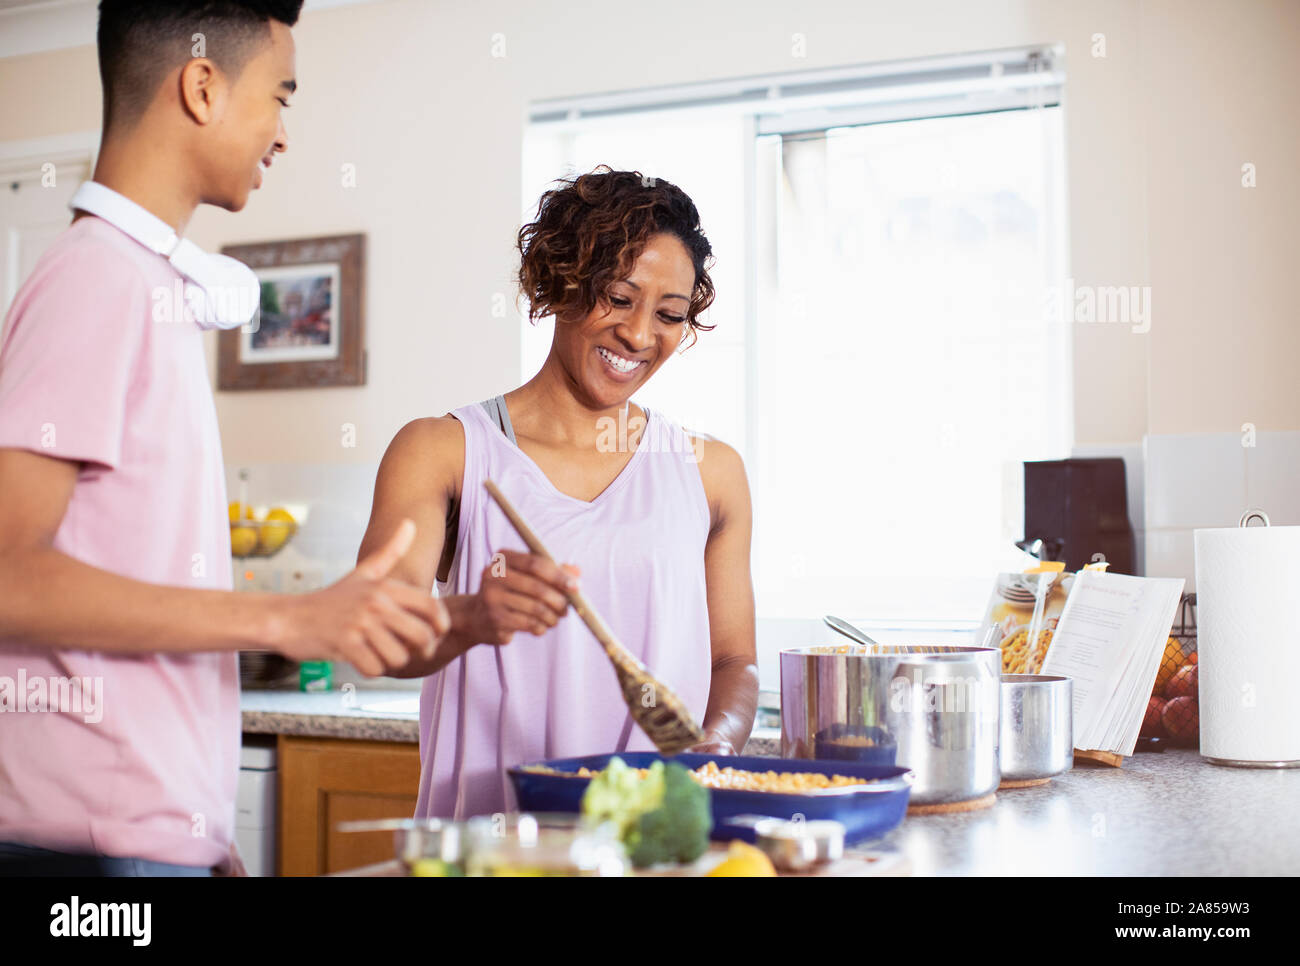 Mother and teenage son cooking in kitchen Stock Photo